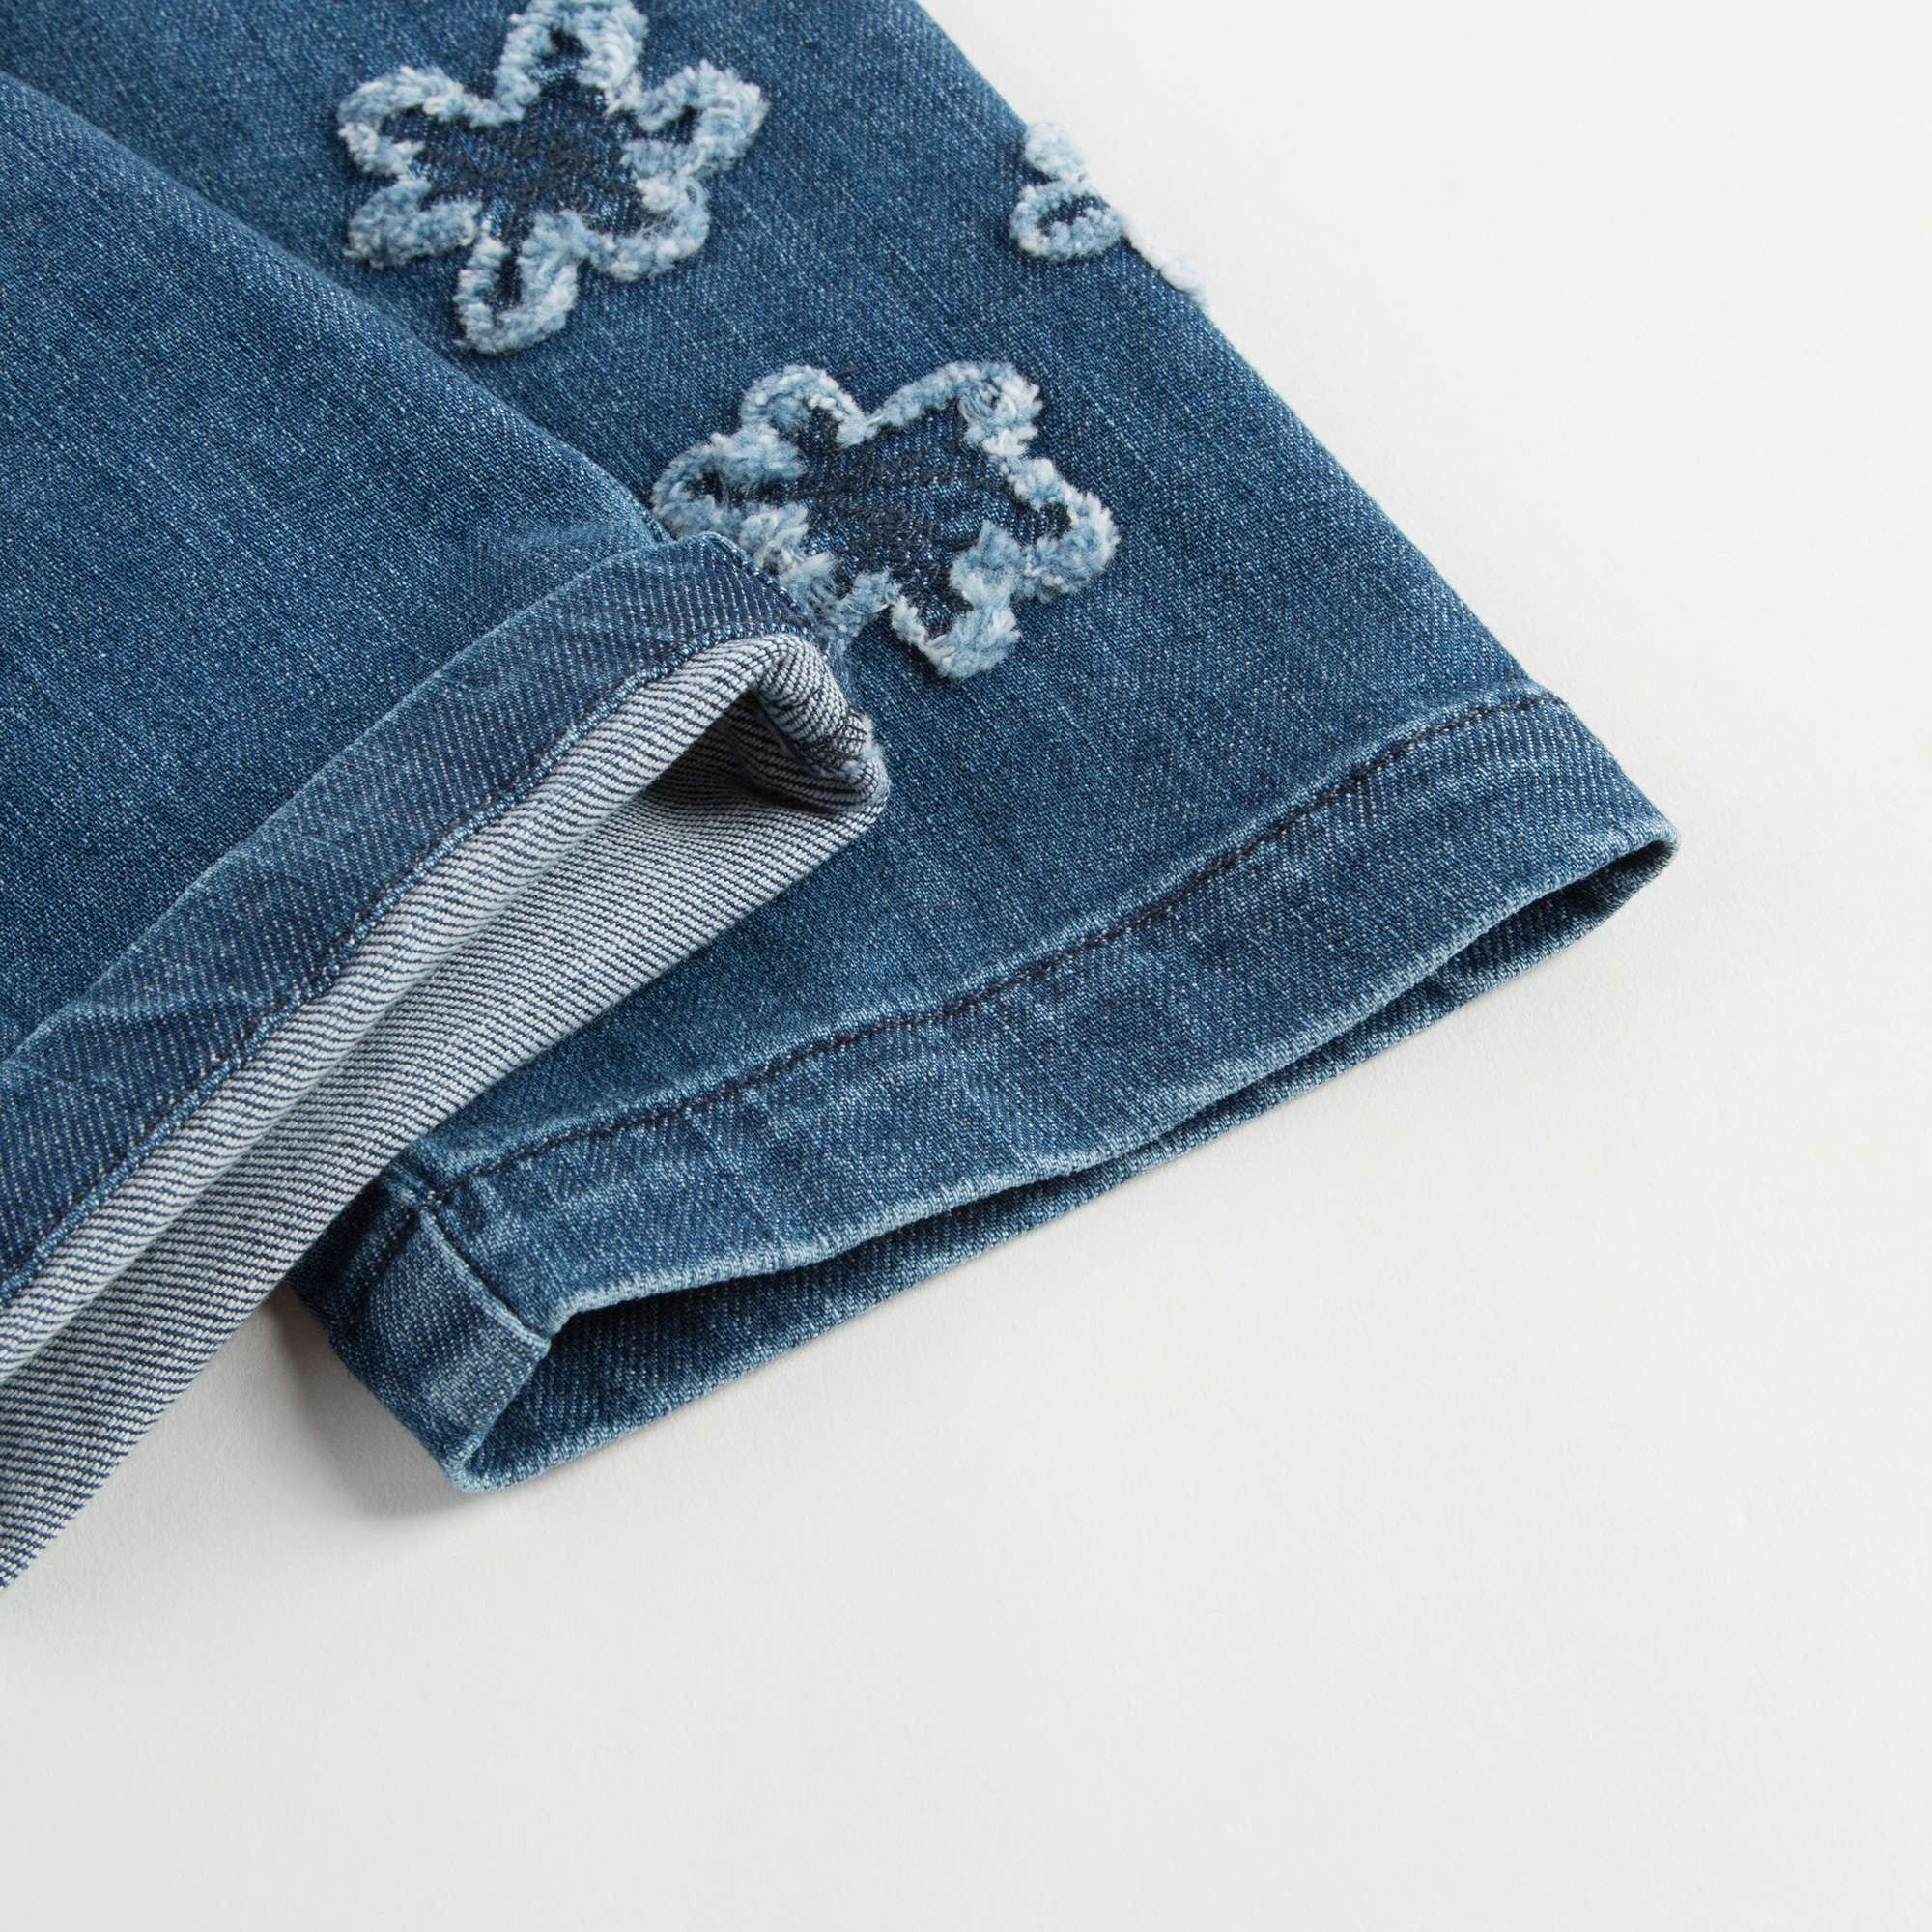 Baby Girls Denim Blue Cotton Jeans With Flowers Trims